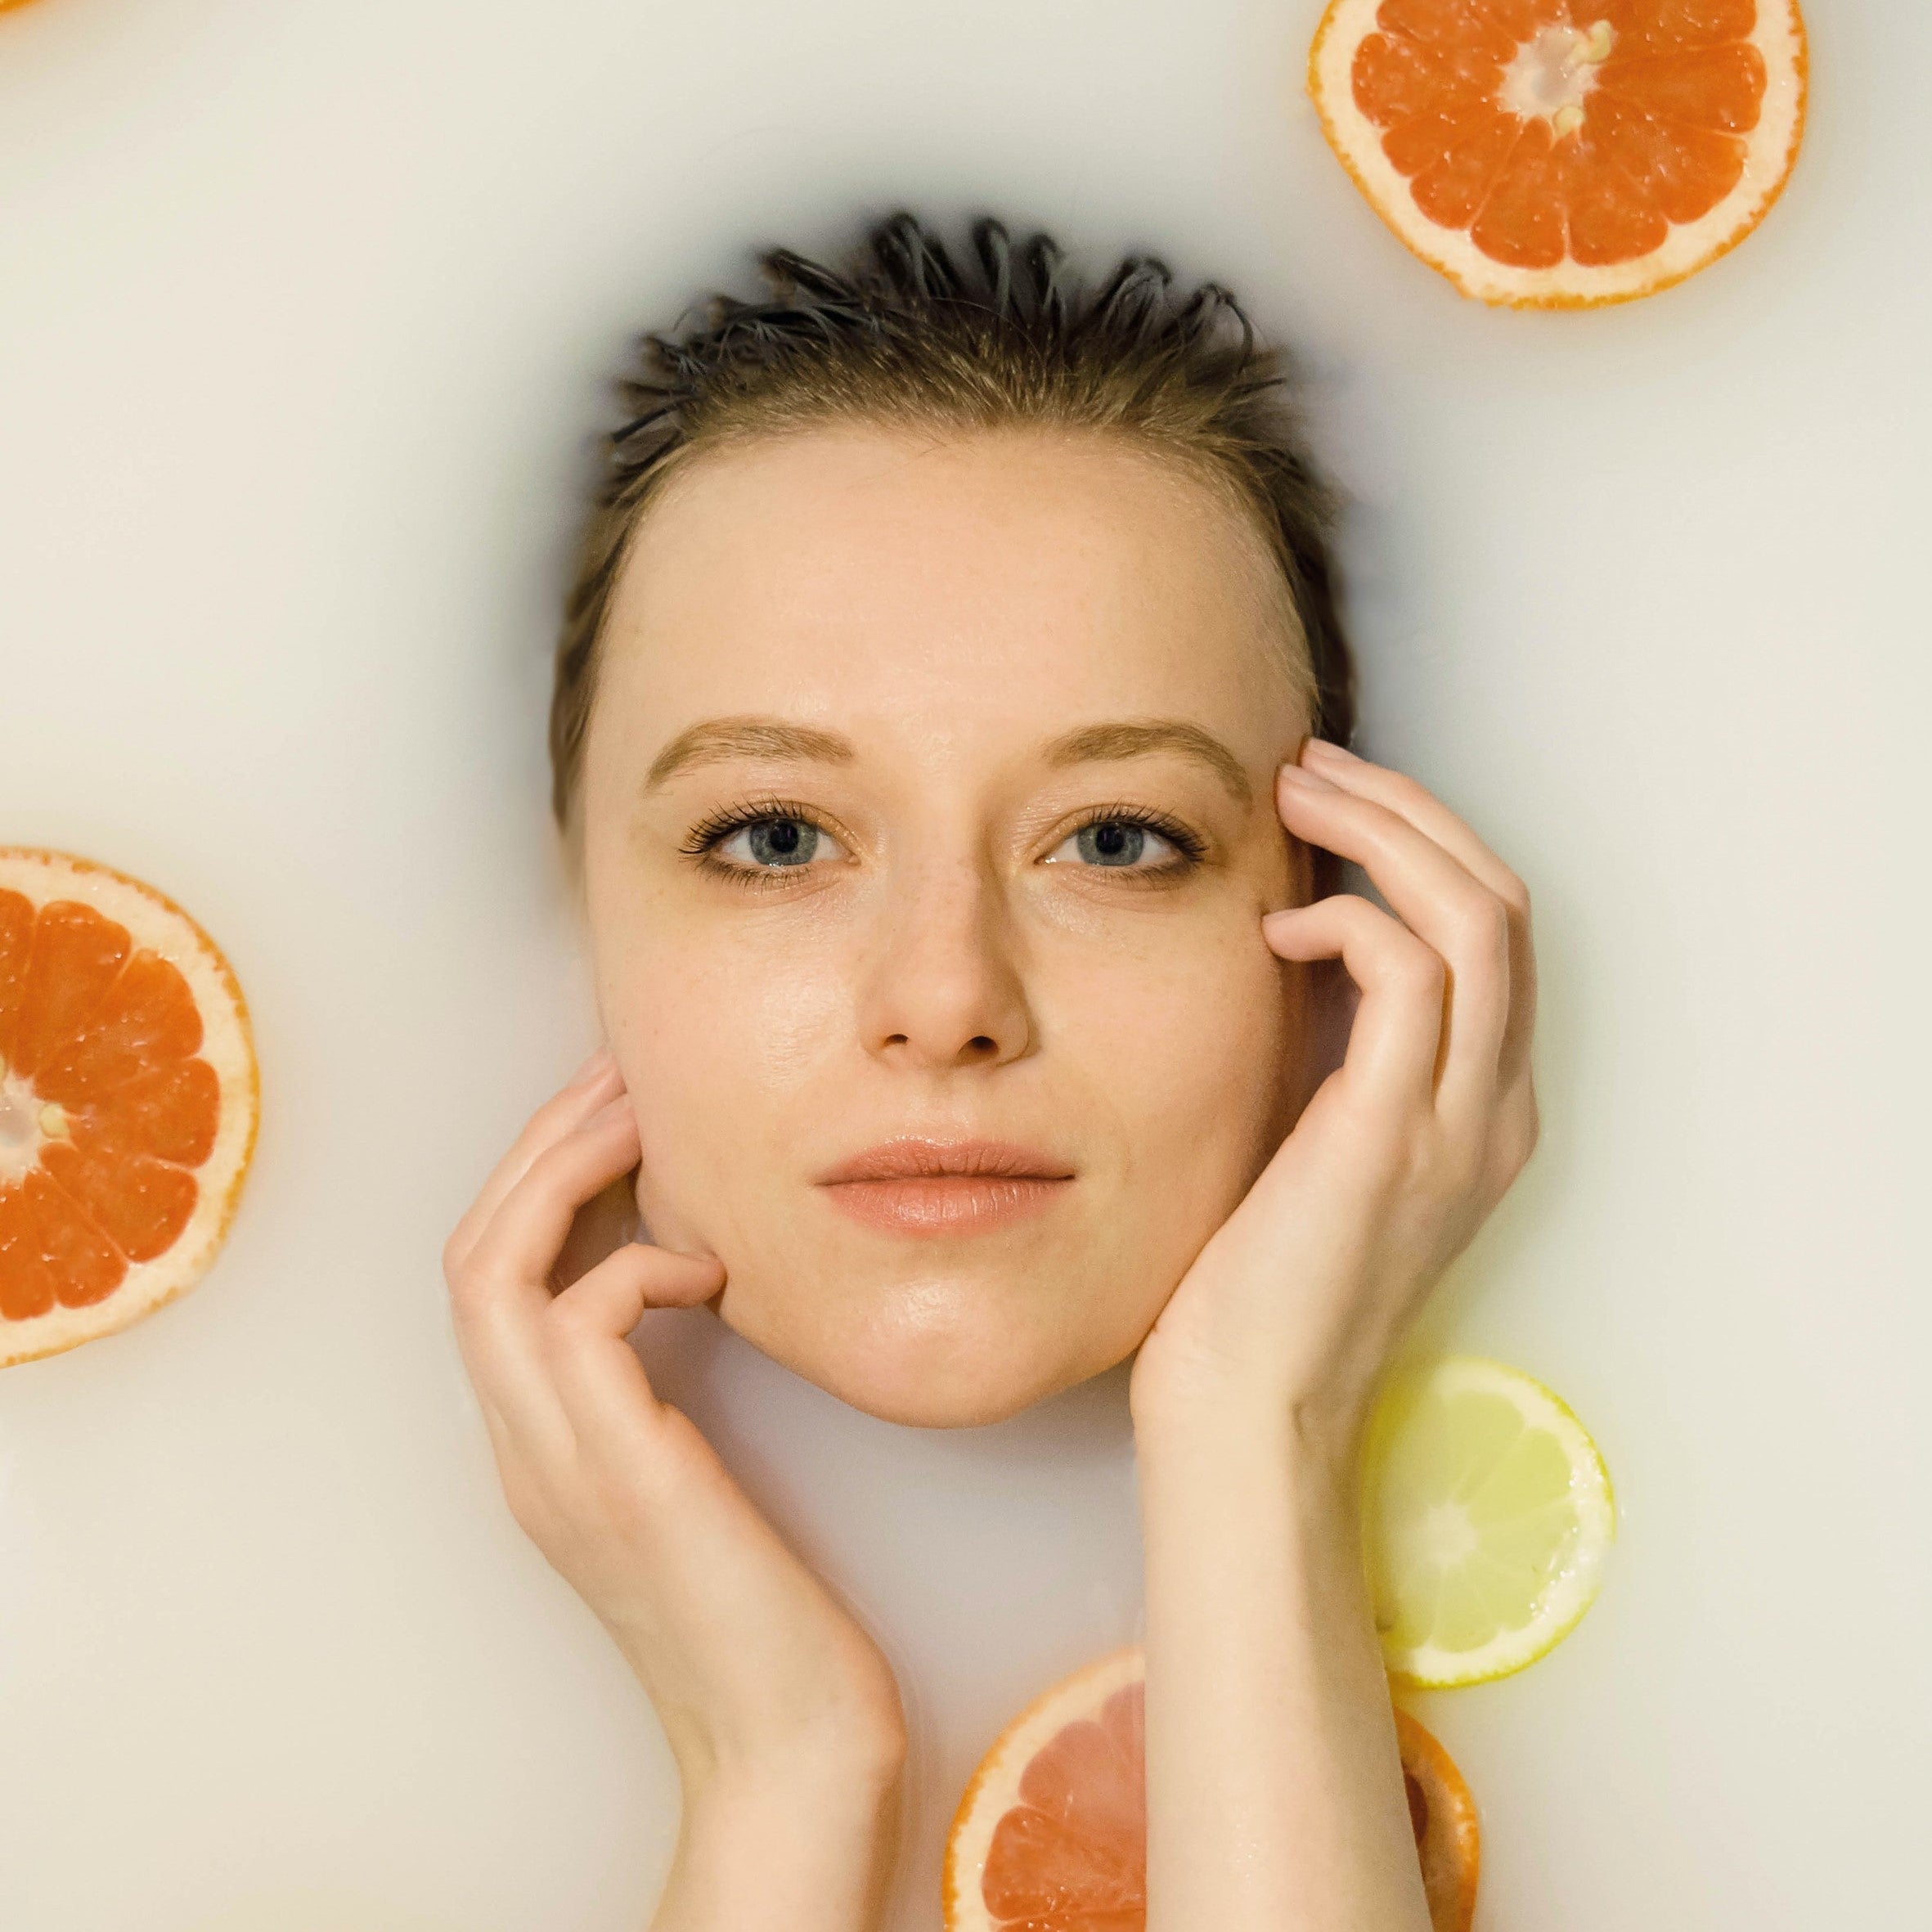 Vitamin C Serum: Why It's Good For Young Skin